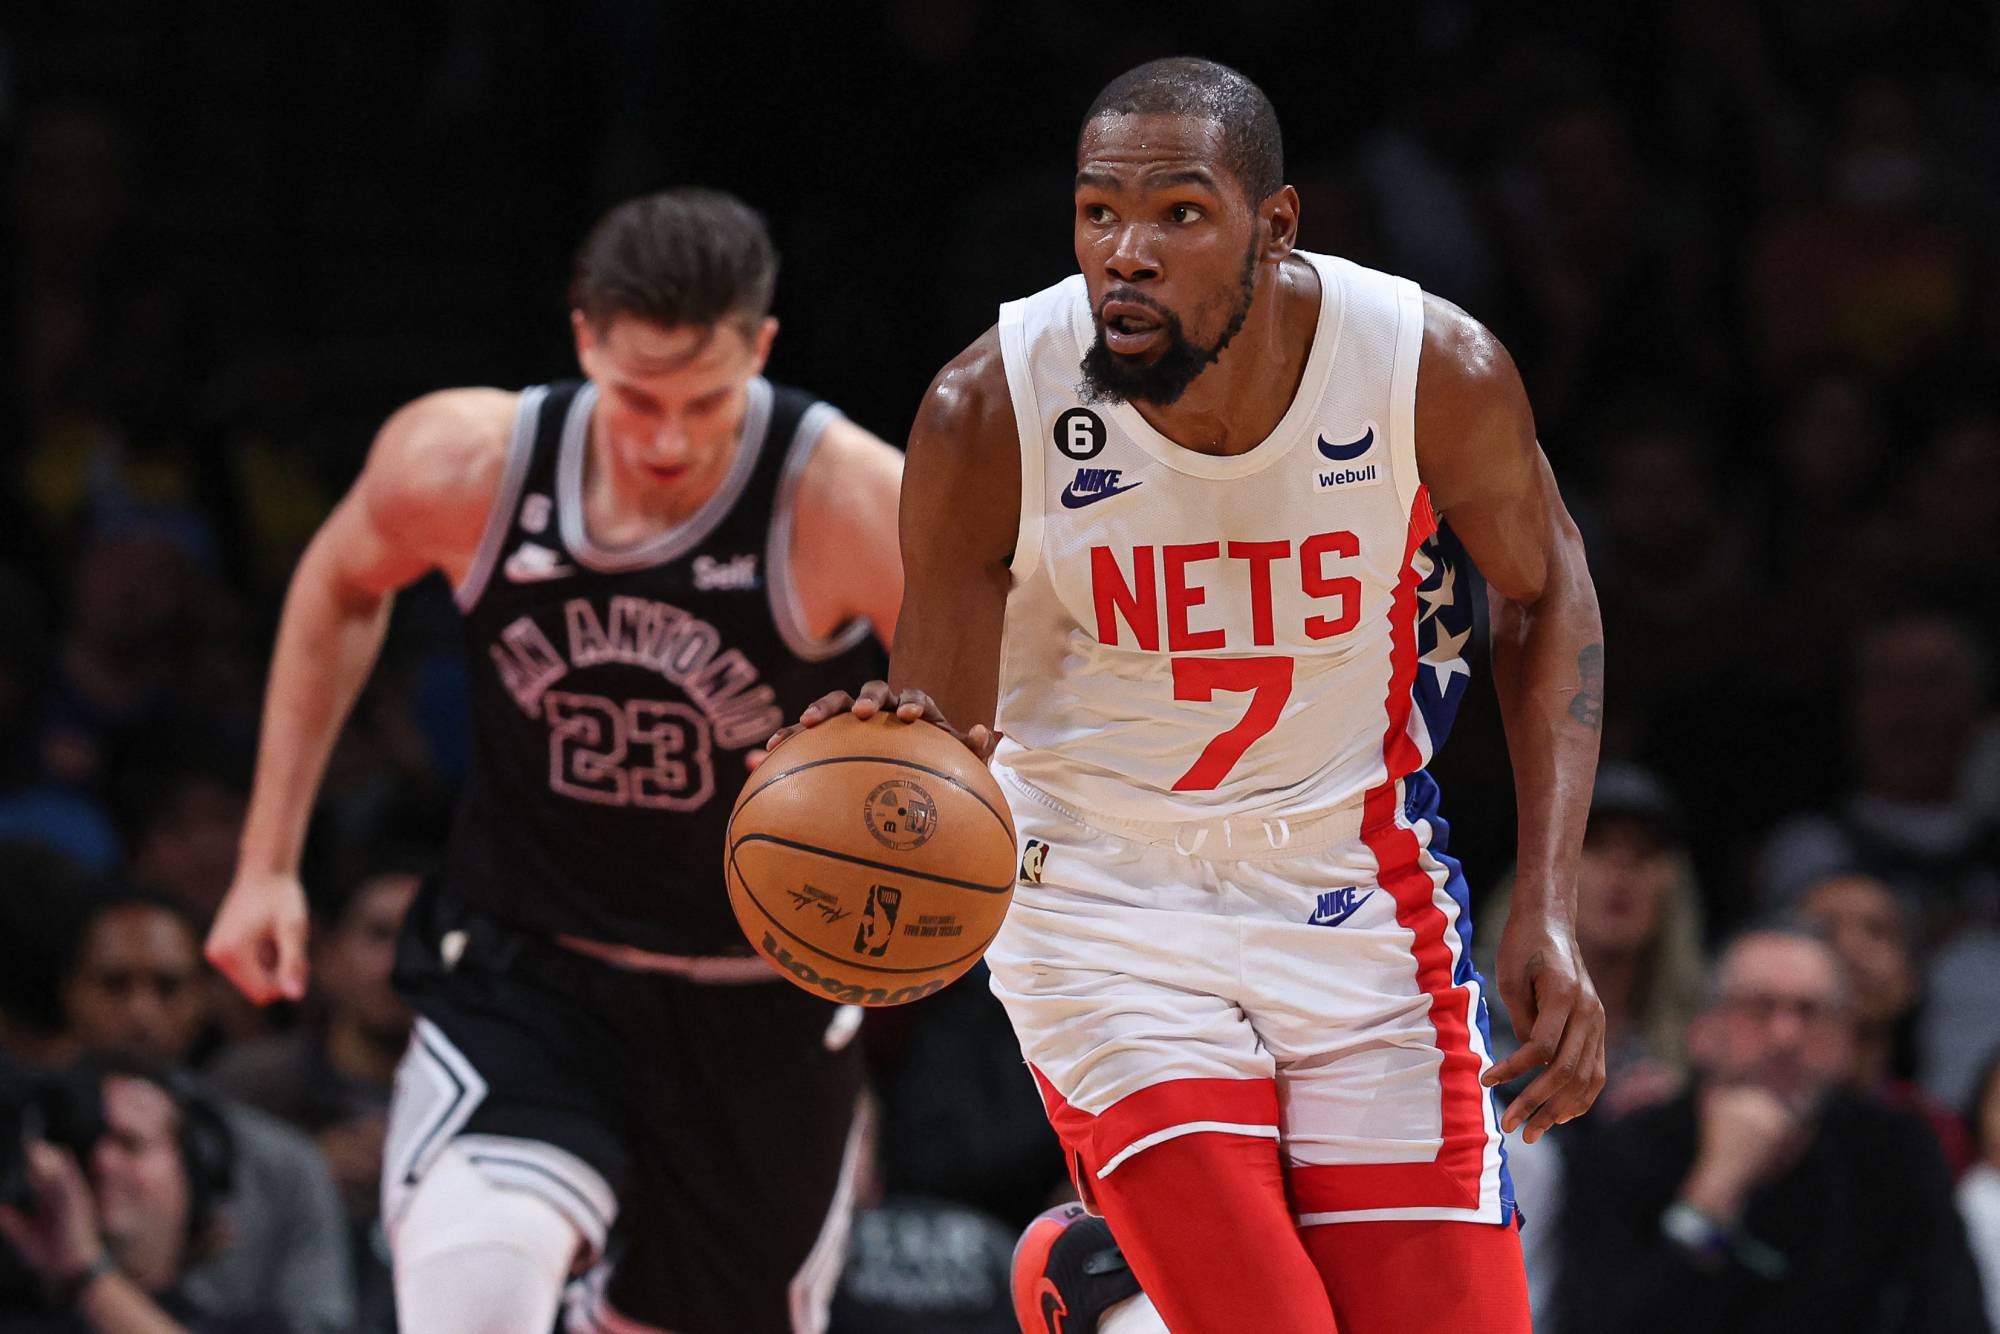 Kevin Durant: Phoenix Suns acquire Kevin Durant from the Brooklyn